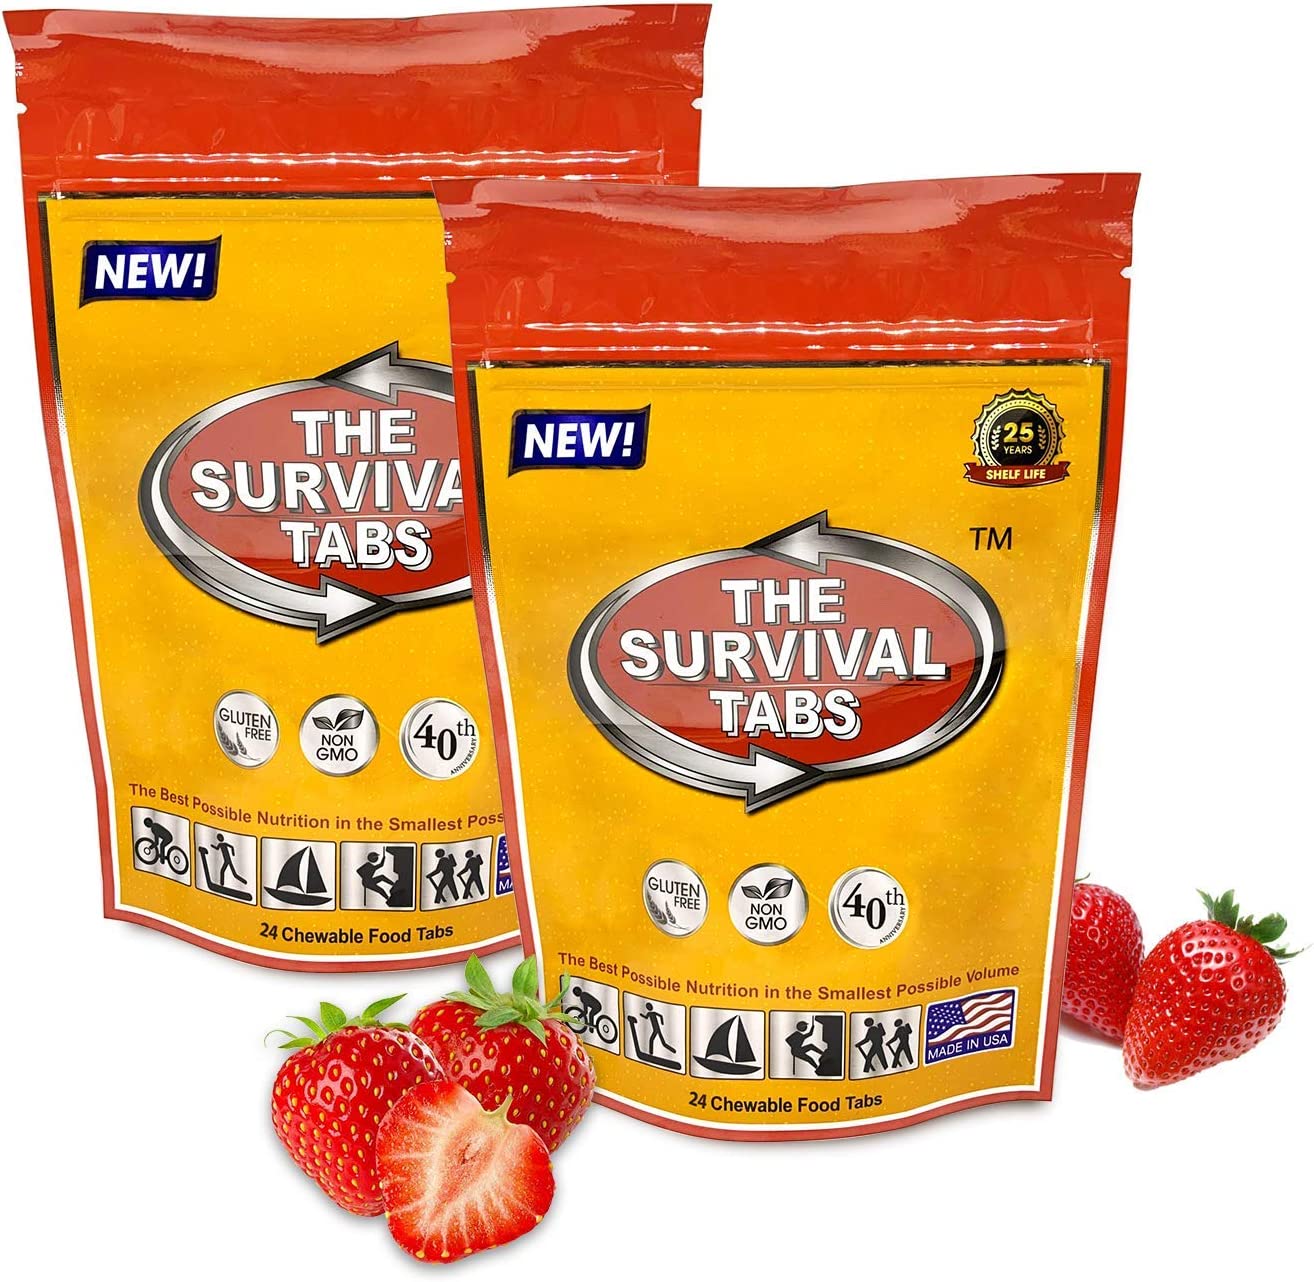 Premium emergency food 96 hours survival tablets none-GMO gluten-free 25 years shelf life (strawberry/2 pouches)